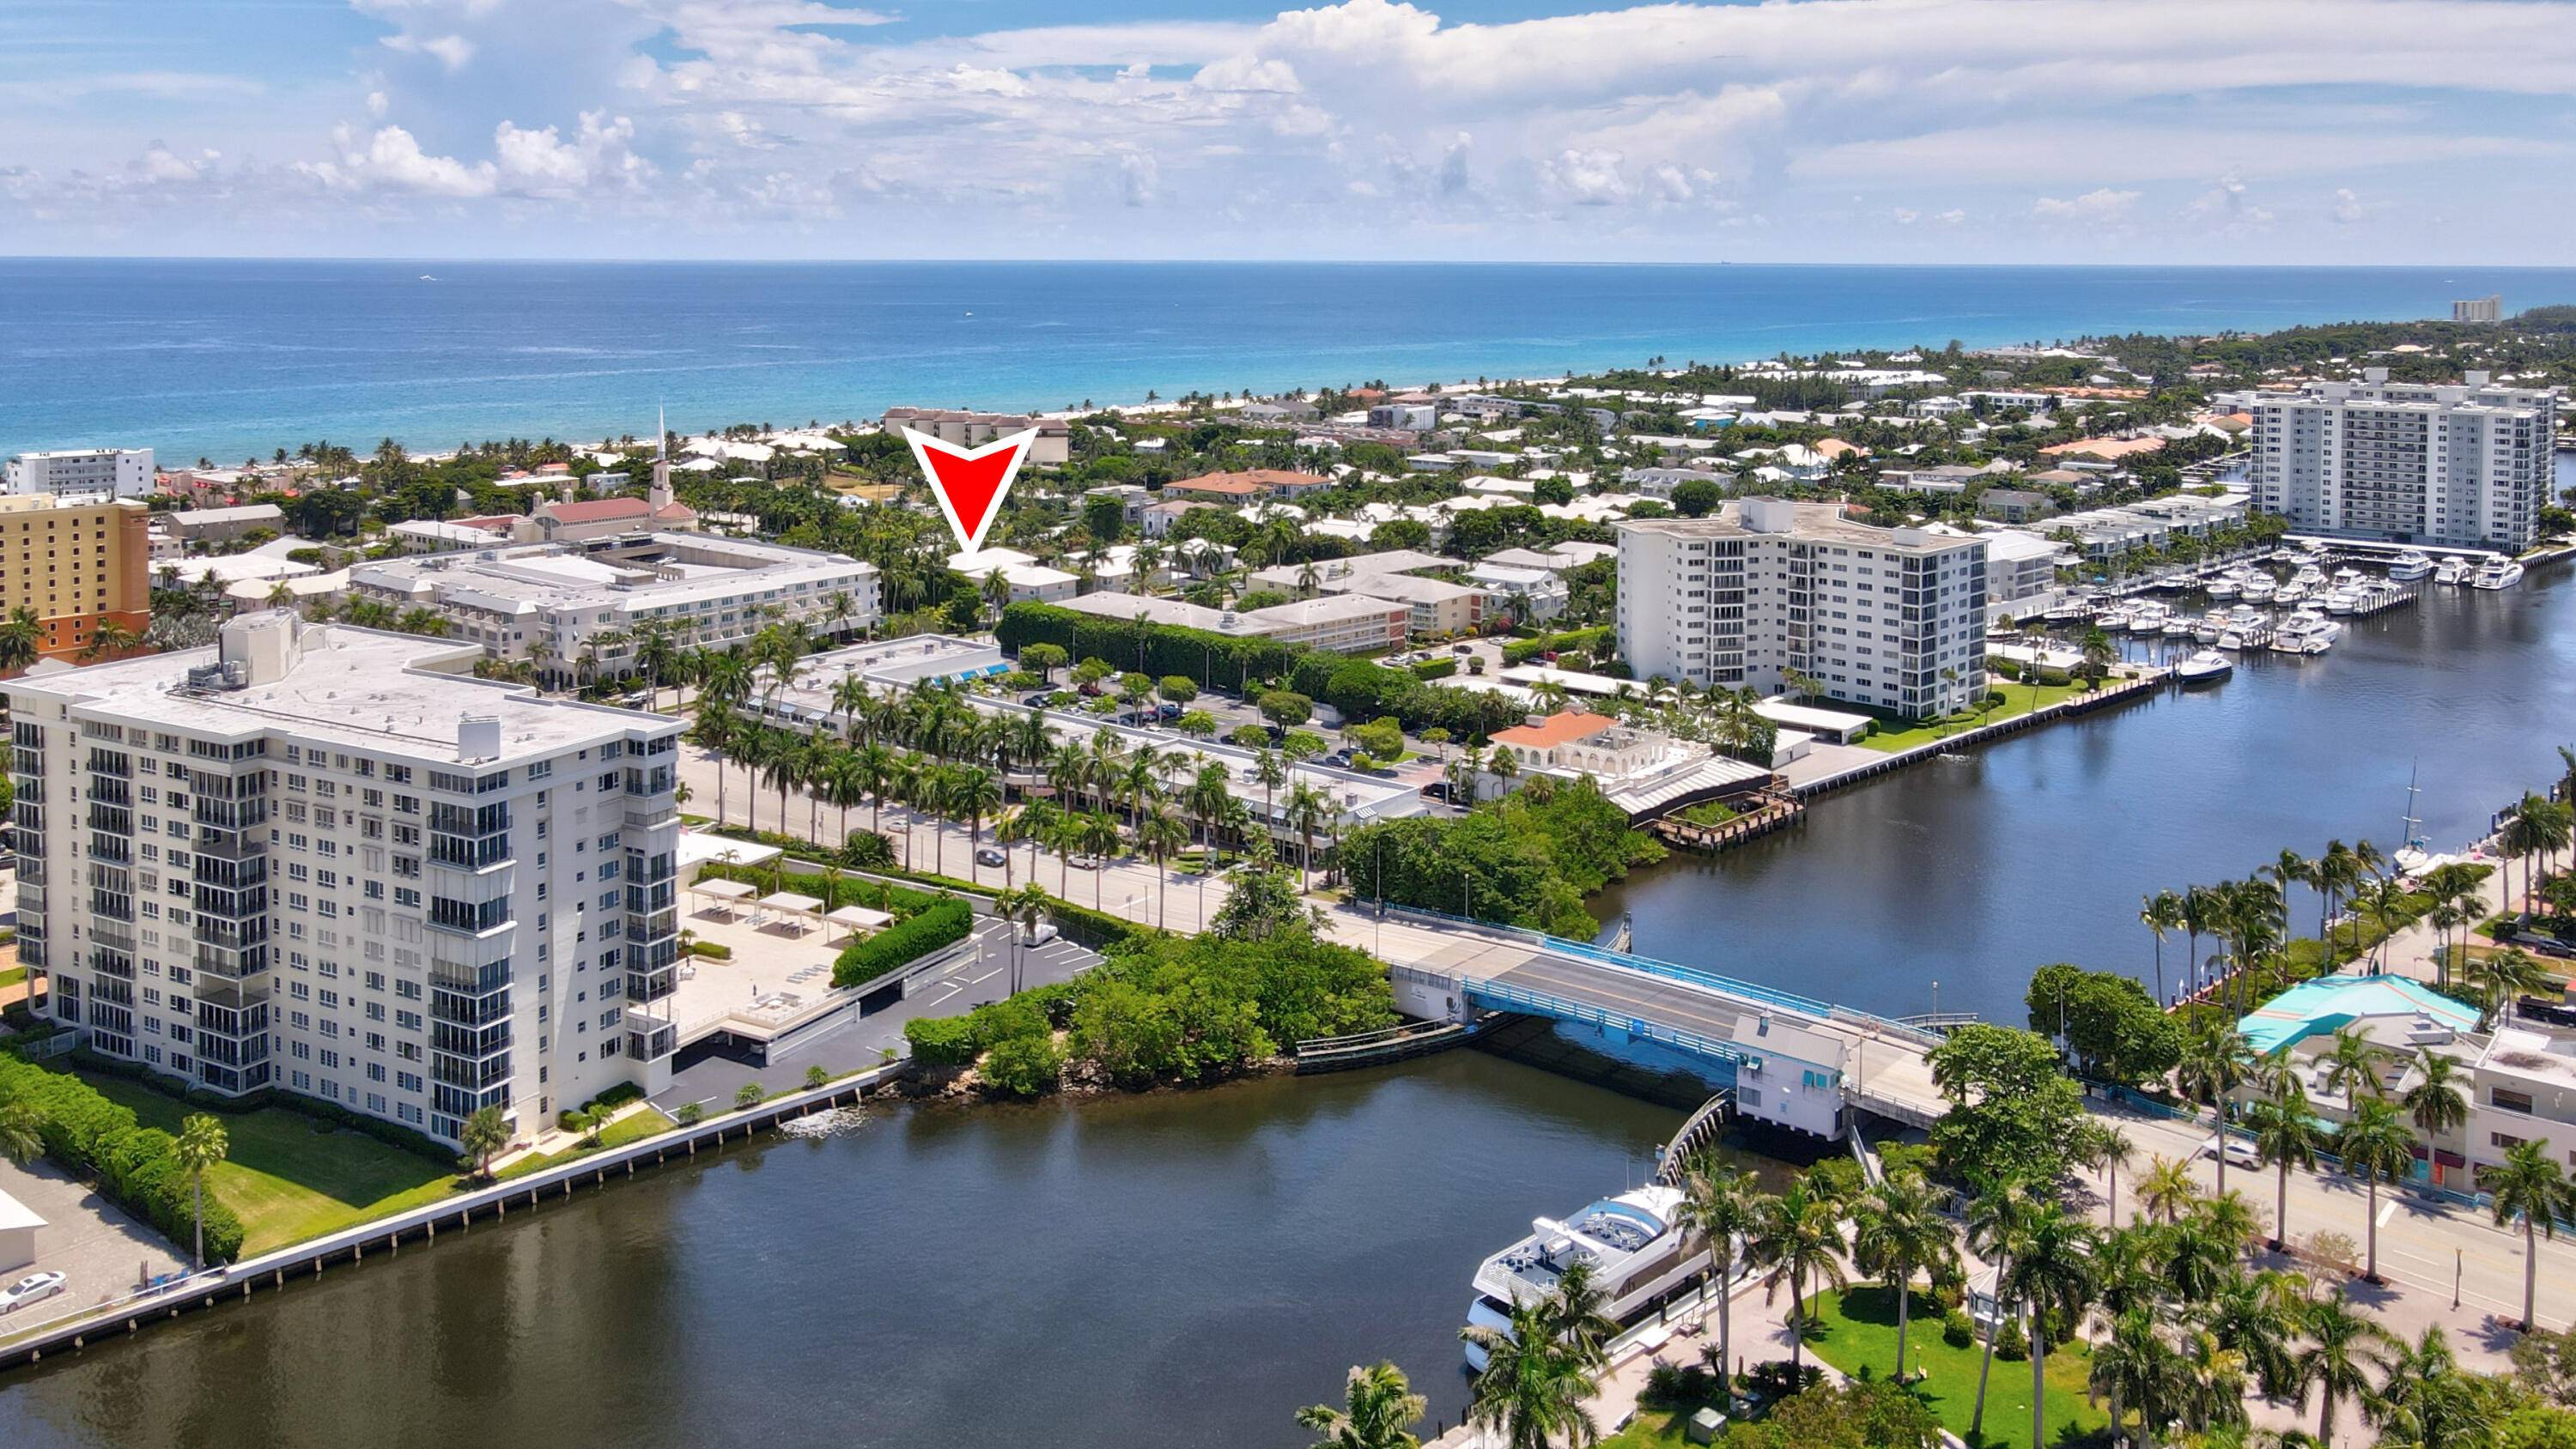 Ideally located just one block from the beach and Atlantic Ave.